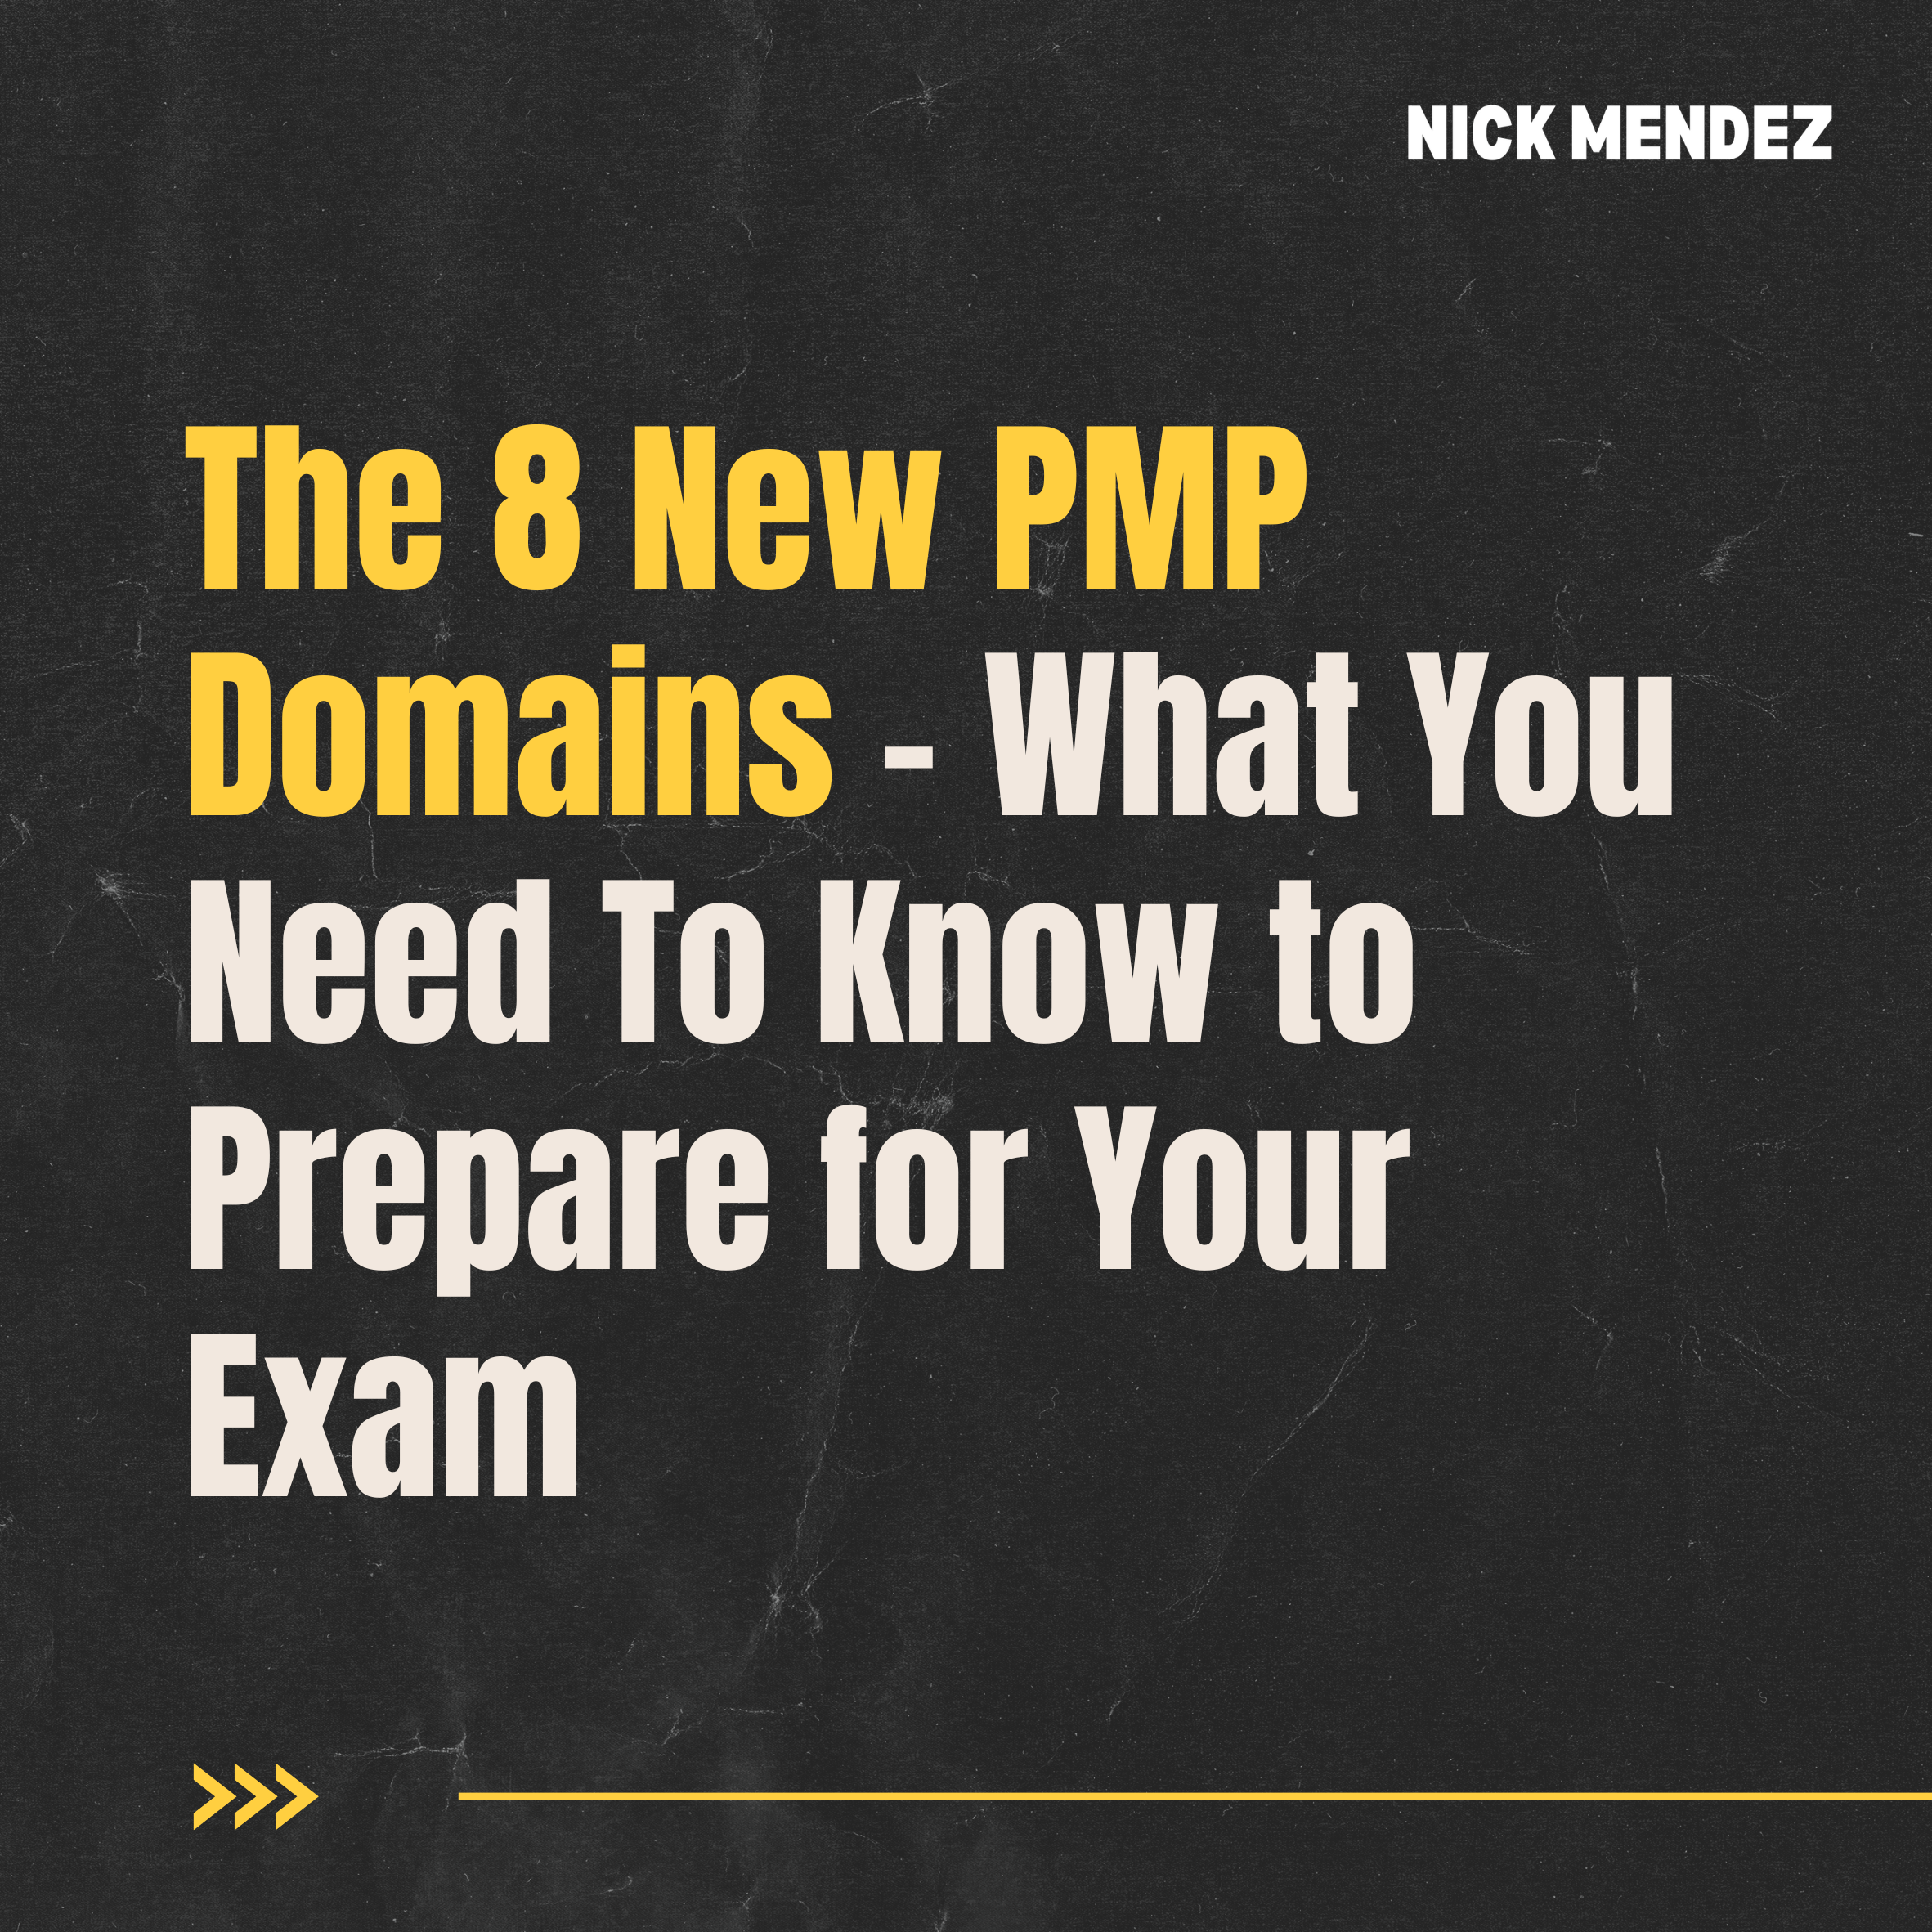 The 8 New PMP Domains - What You Need To Know to Prepare for Your Exam by Nick Mendez, PMP, Security+